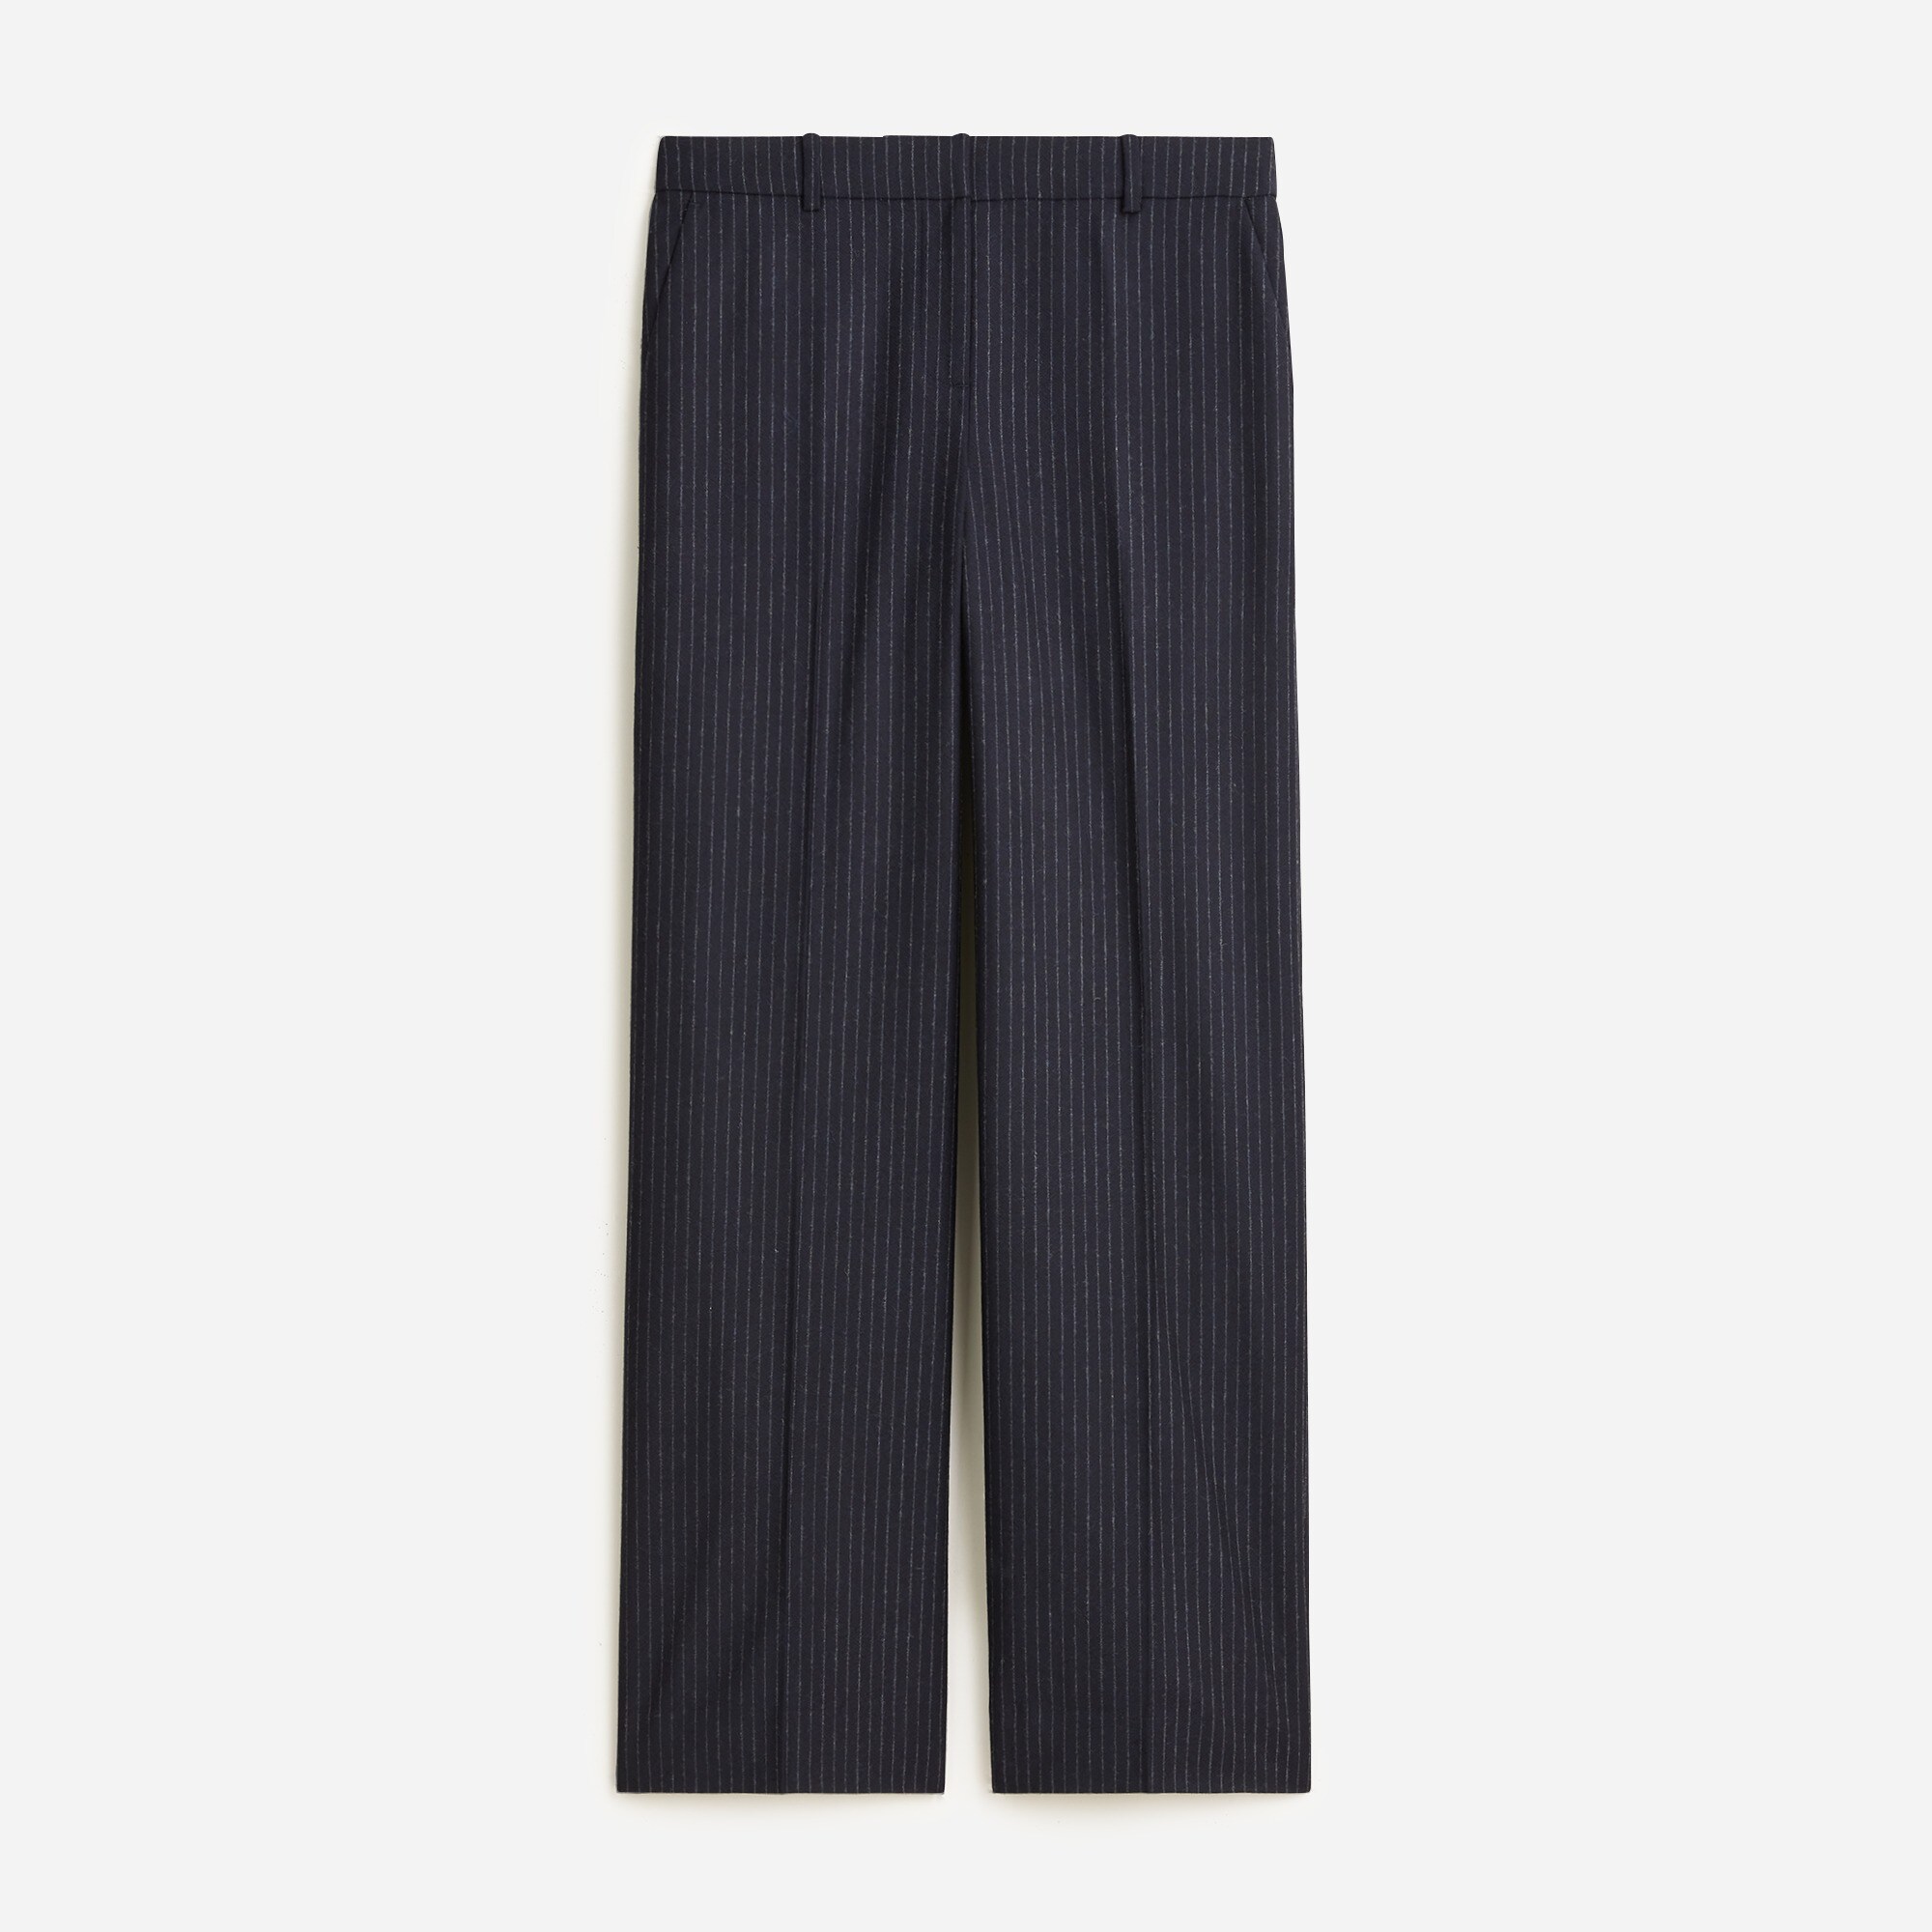  Collection full-length Sydney wide-leg pant in pinstripe Italian wool